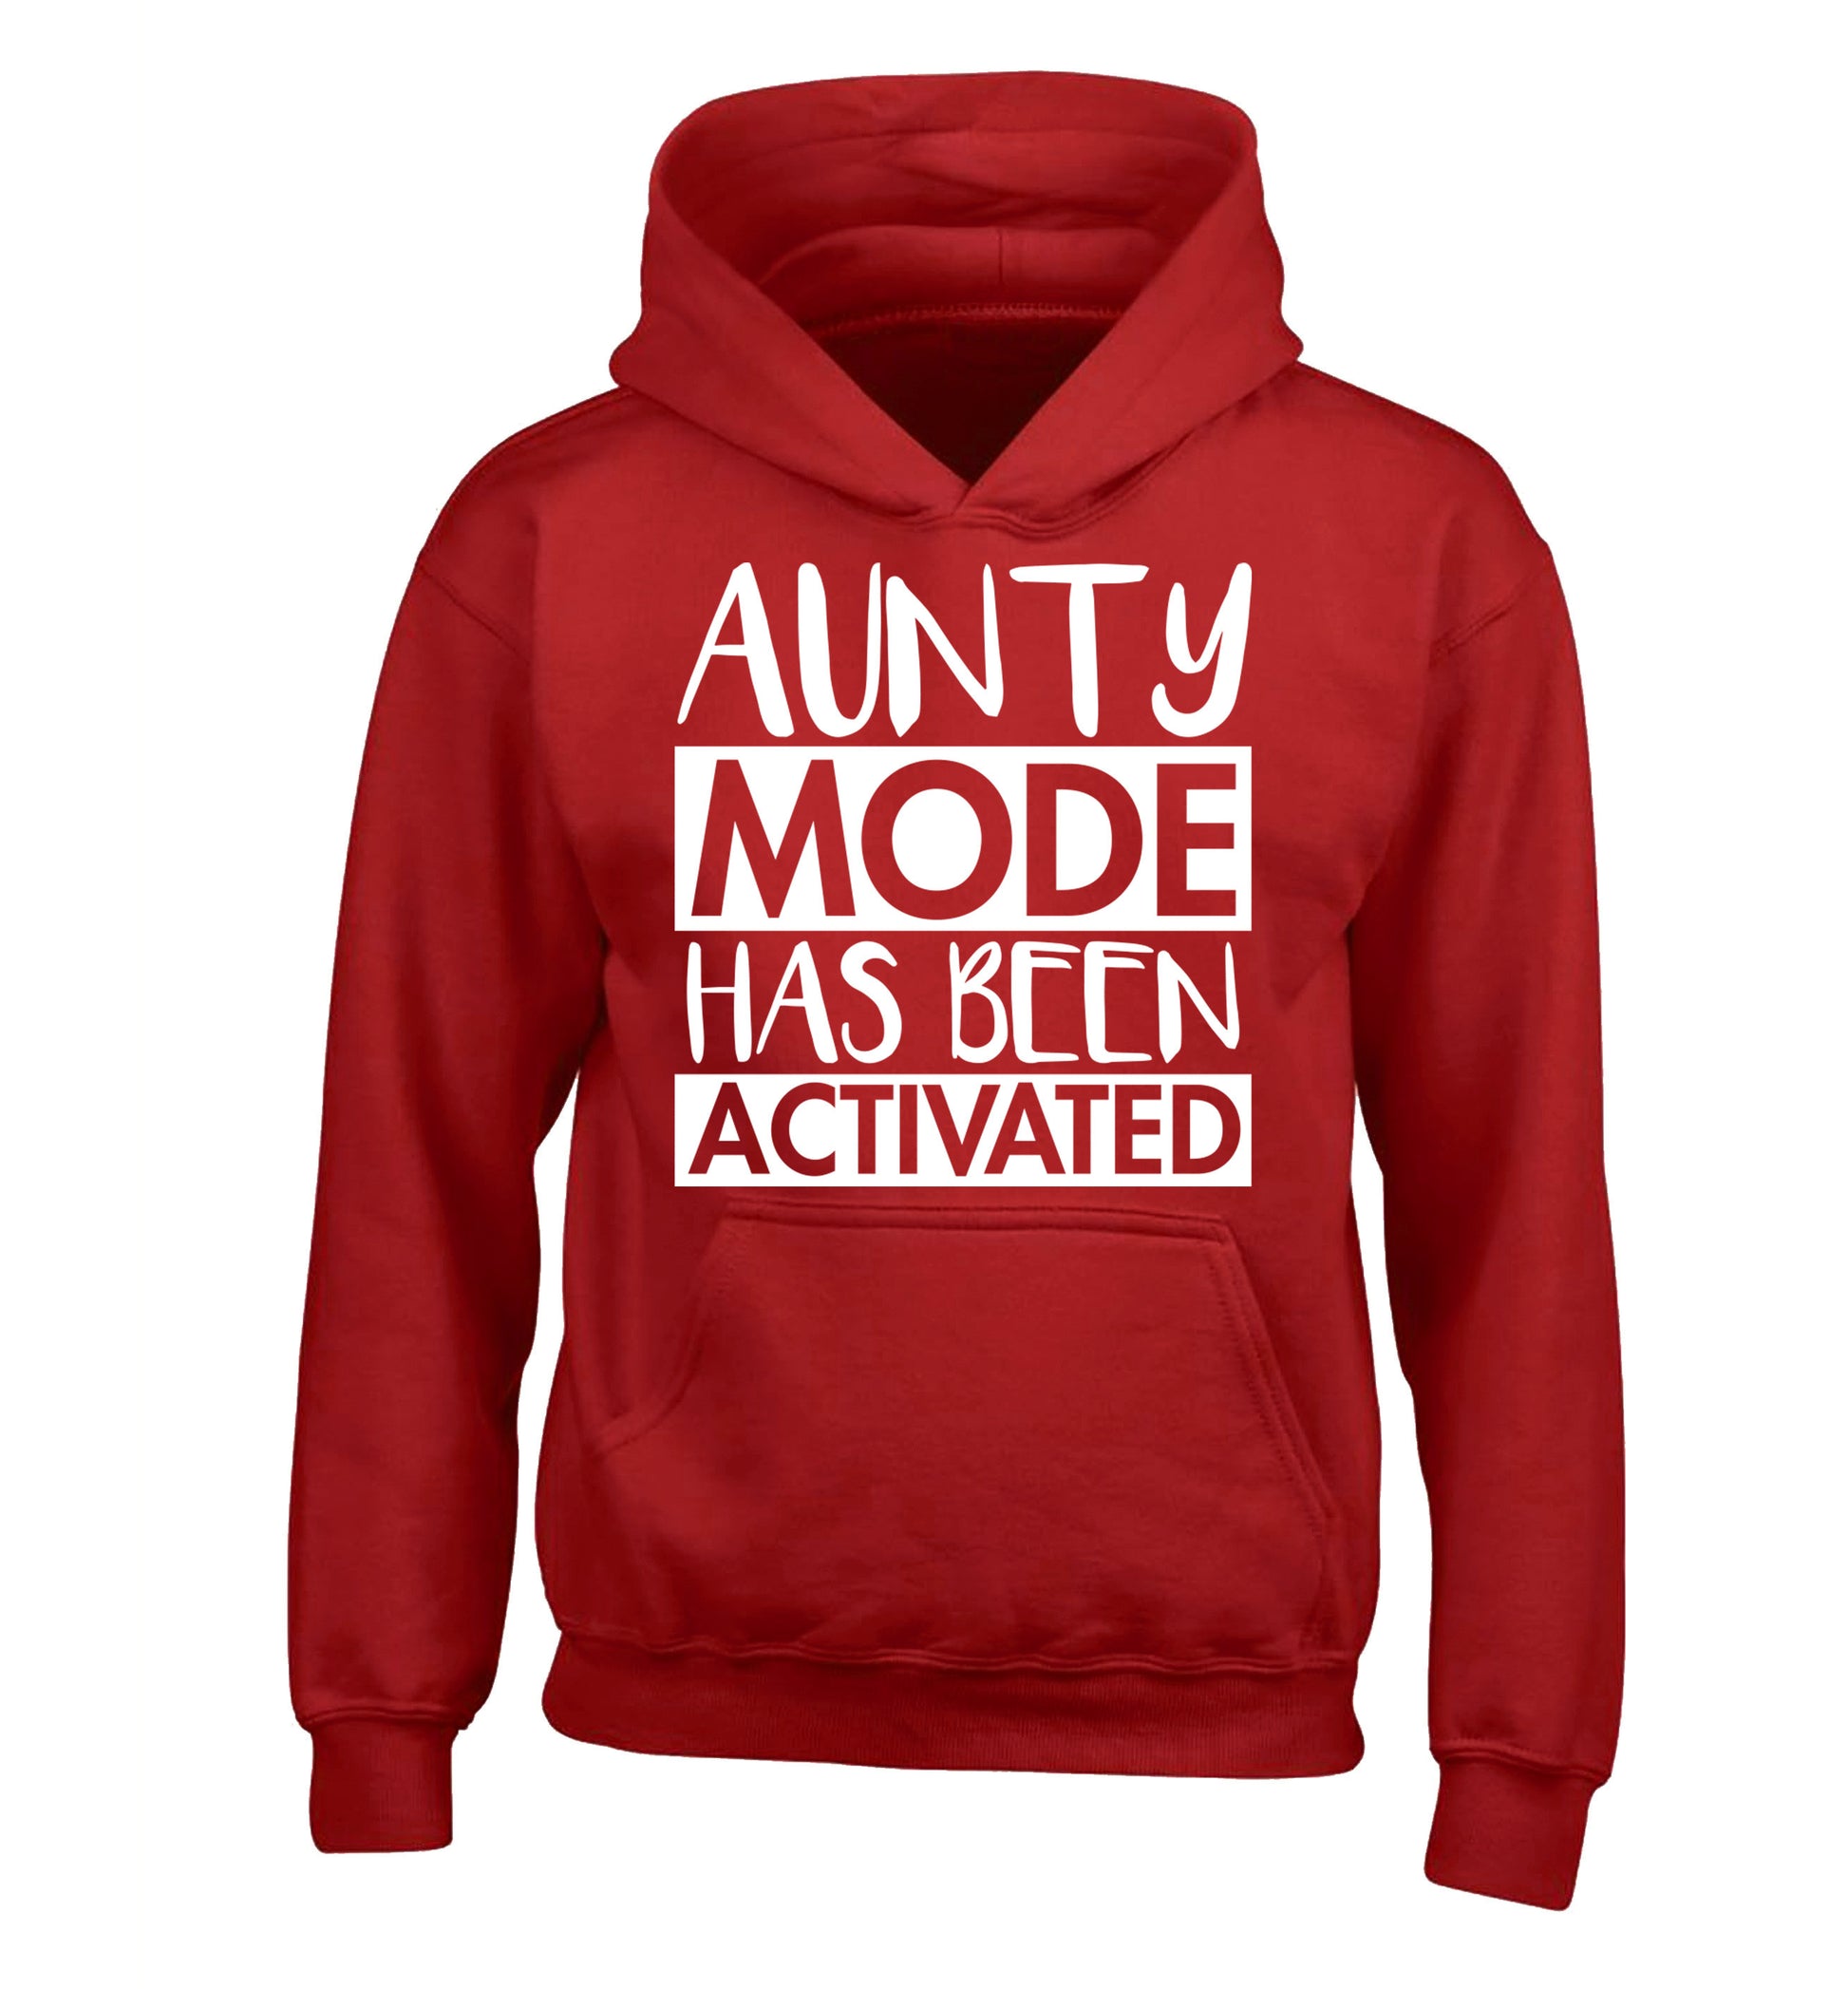 Aunty mode activated children's red hoodie 12-14 Years